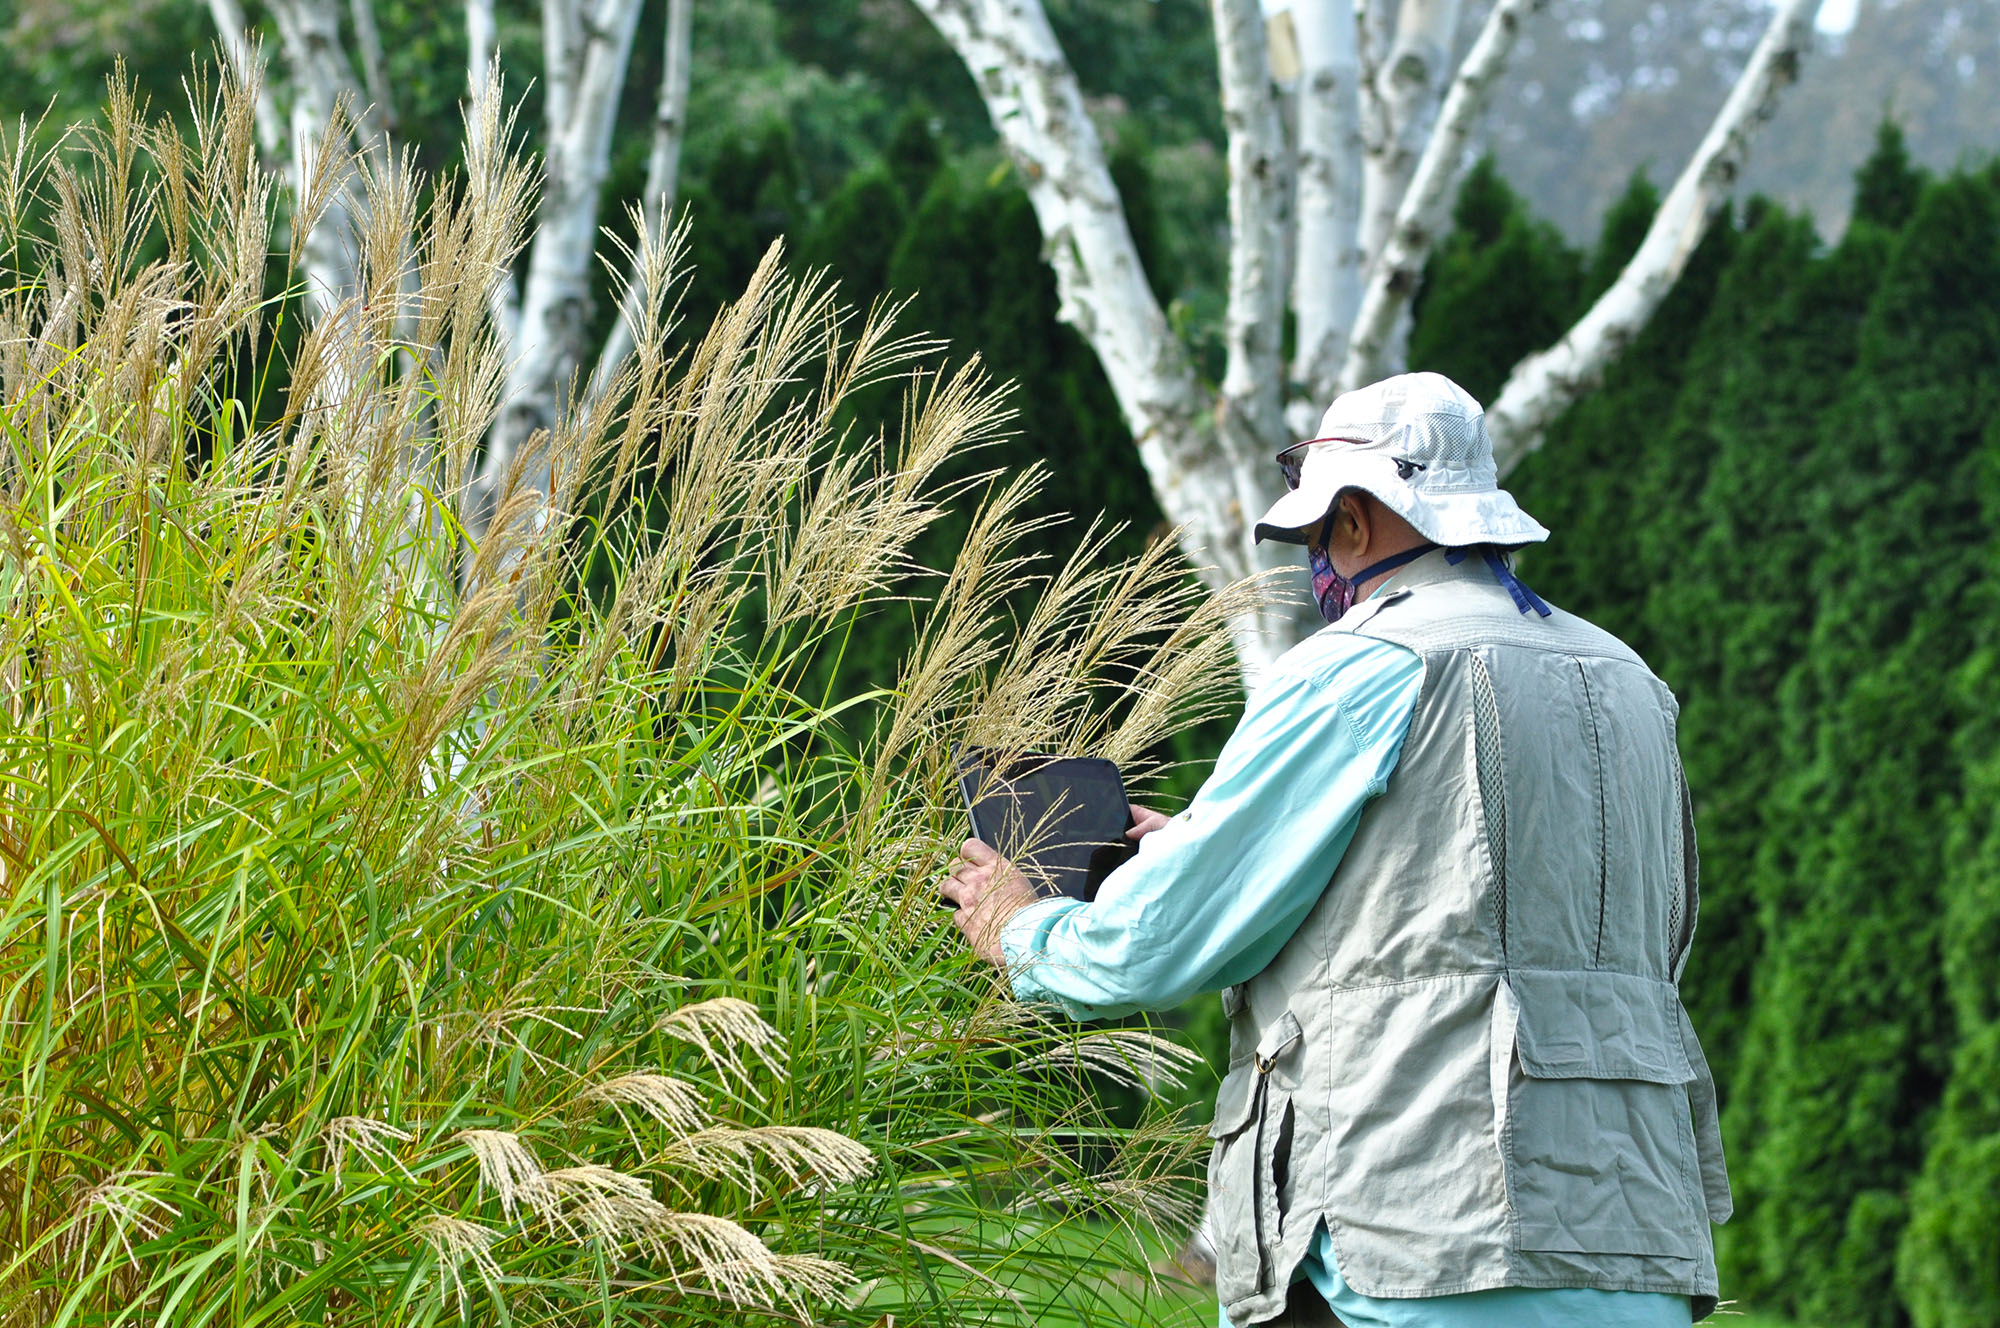 Grass plants have their own beauty, Mark is using an IPad for photos and videos.